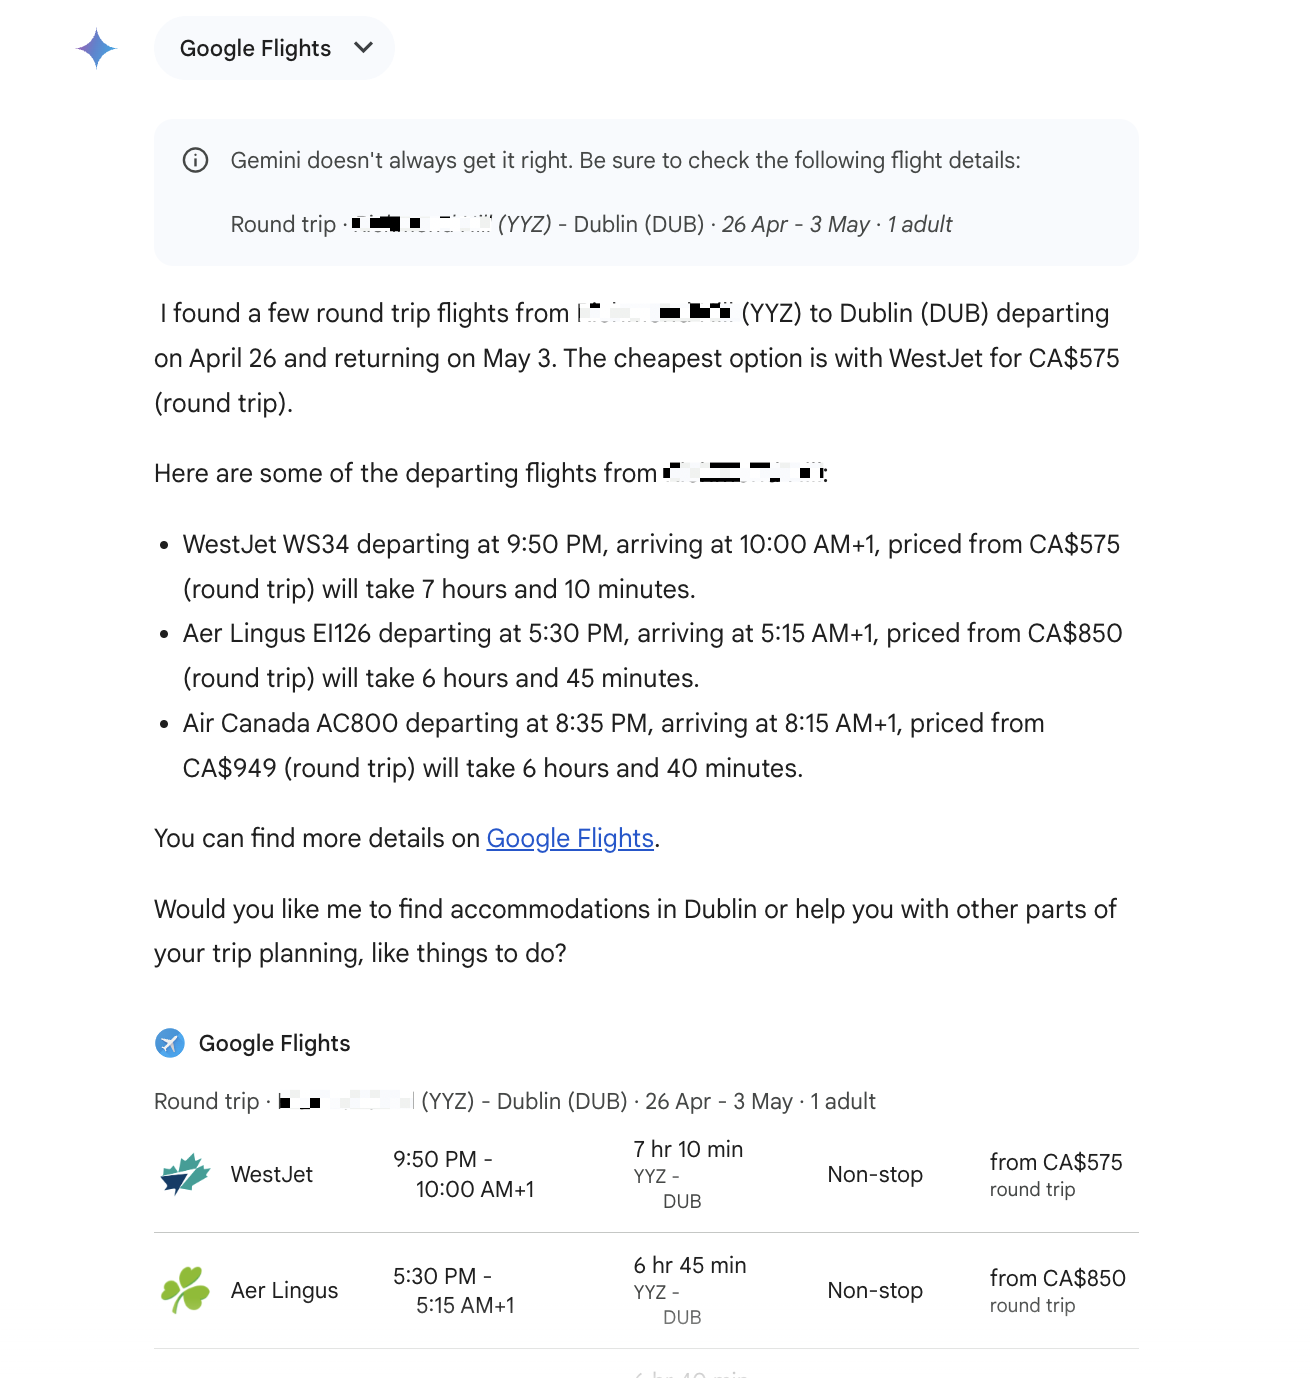 Real-time flight information pulled into a Gemini conversation using the Google Flights Gemini Extension.